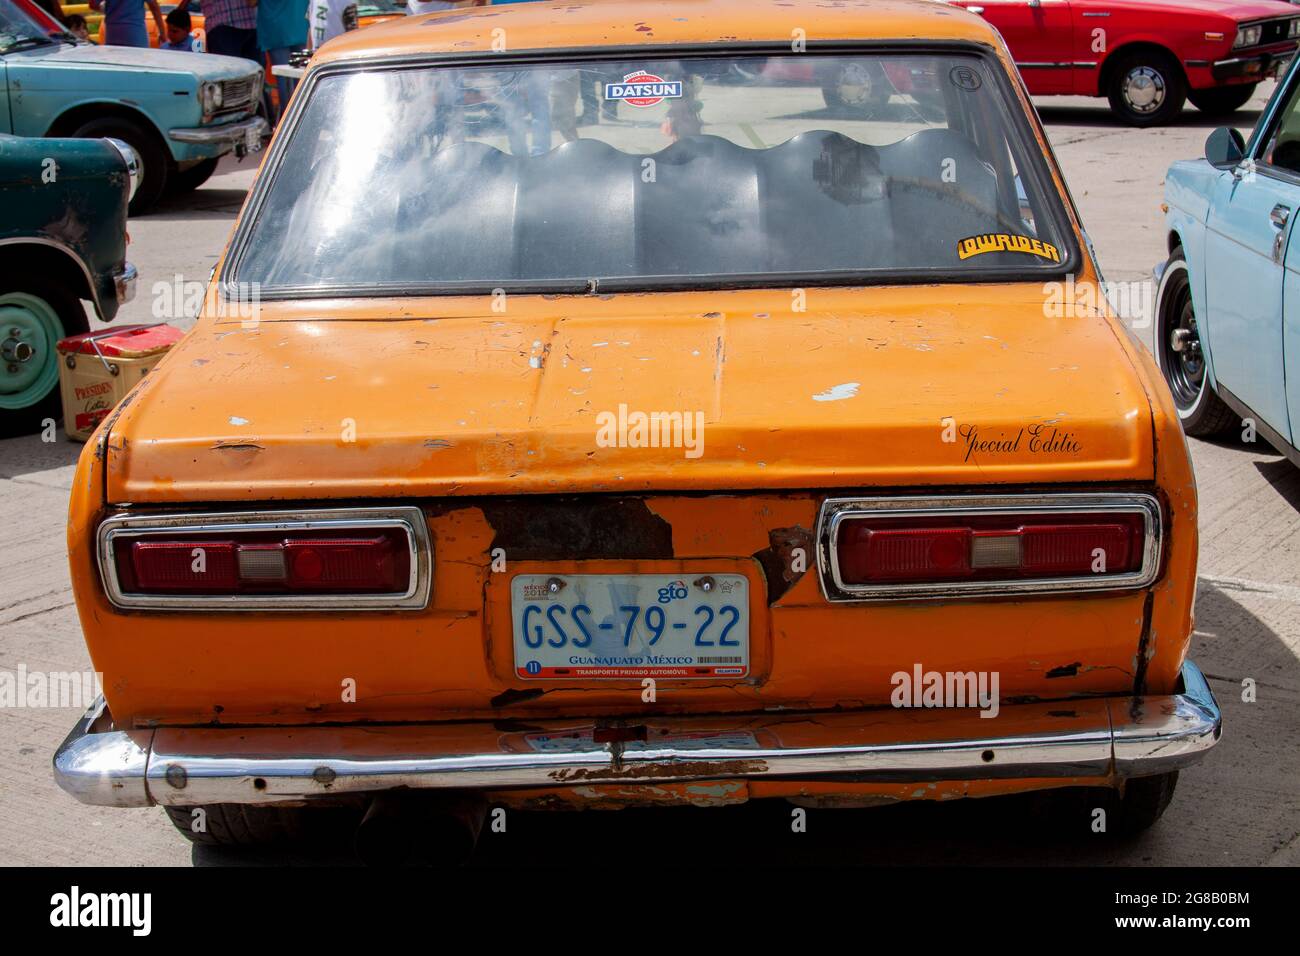 Back of an old Datsun car in the streets of Mexico Stock Photo